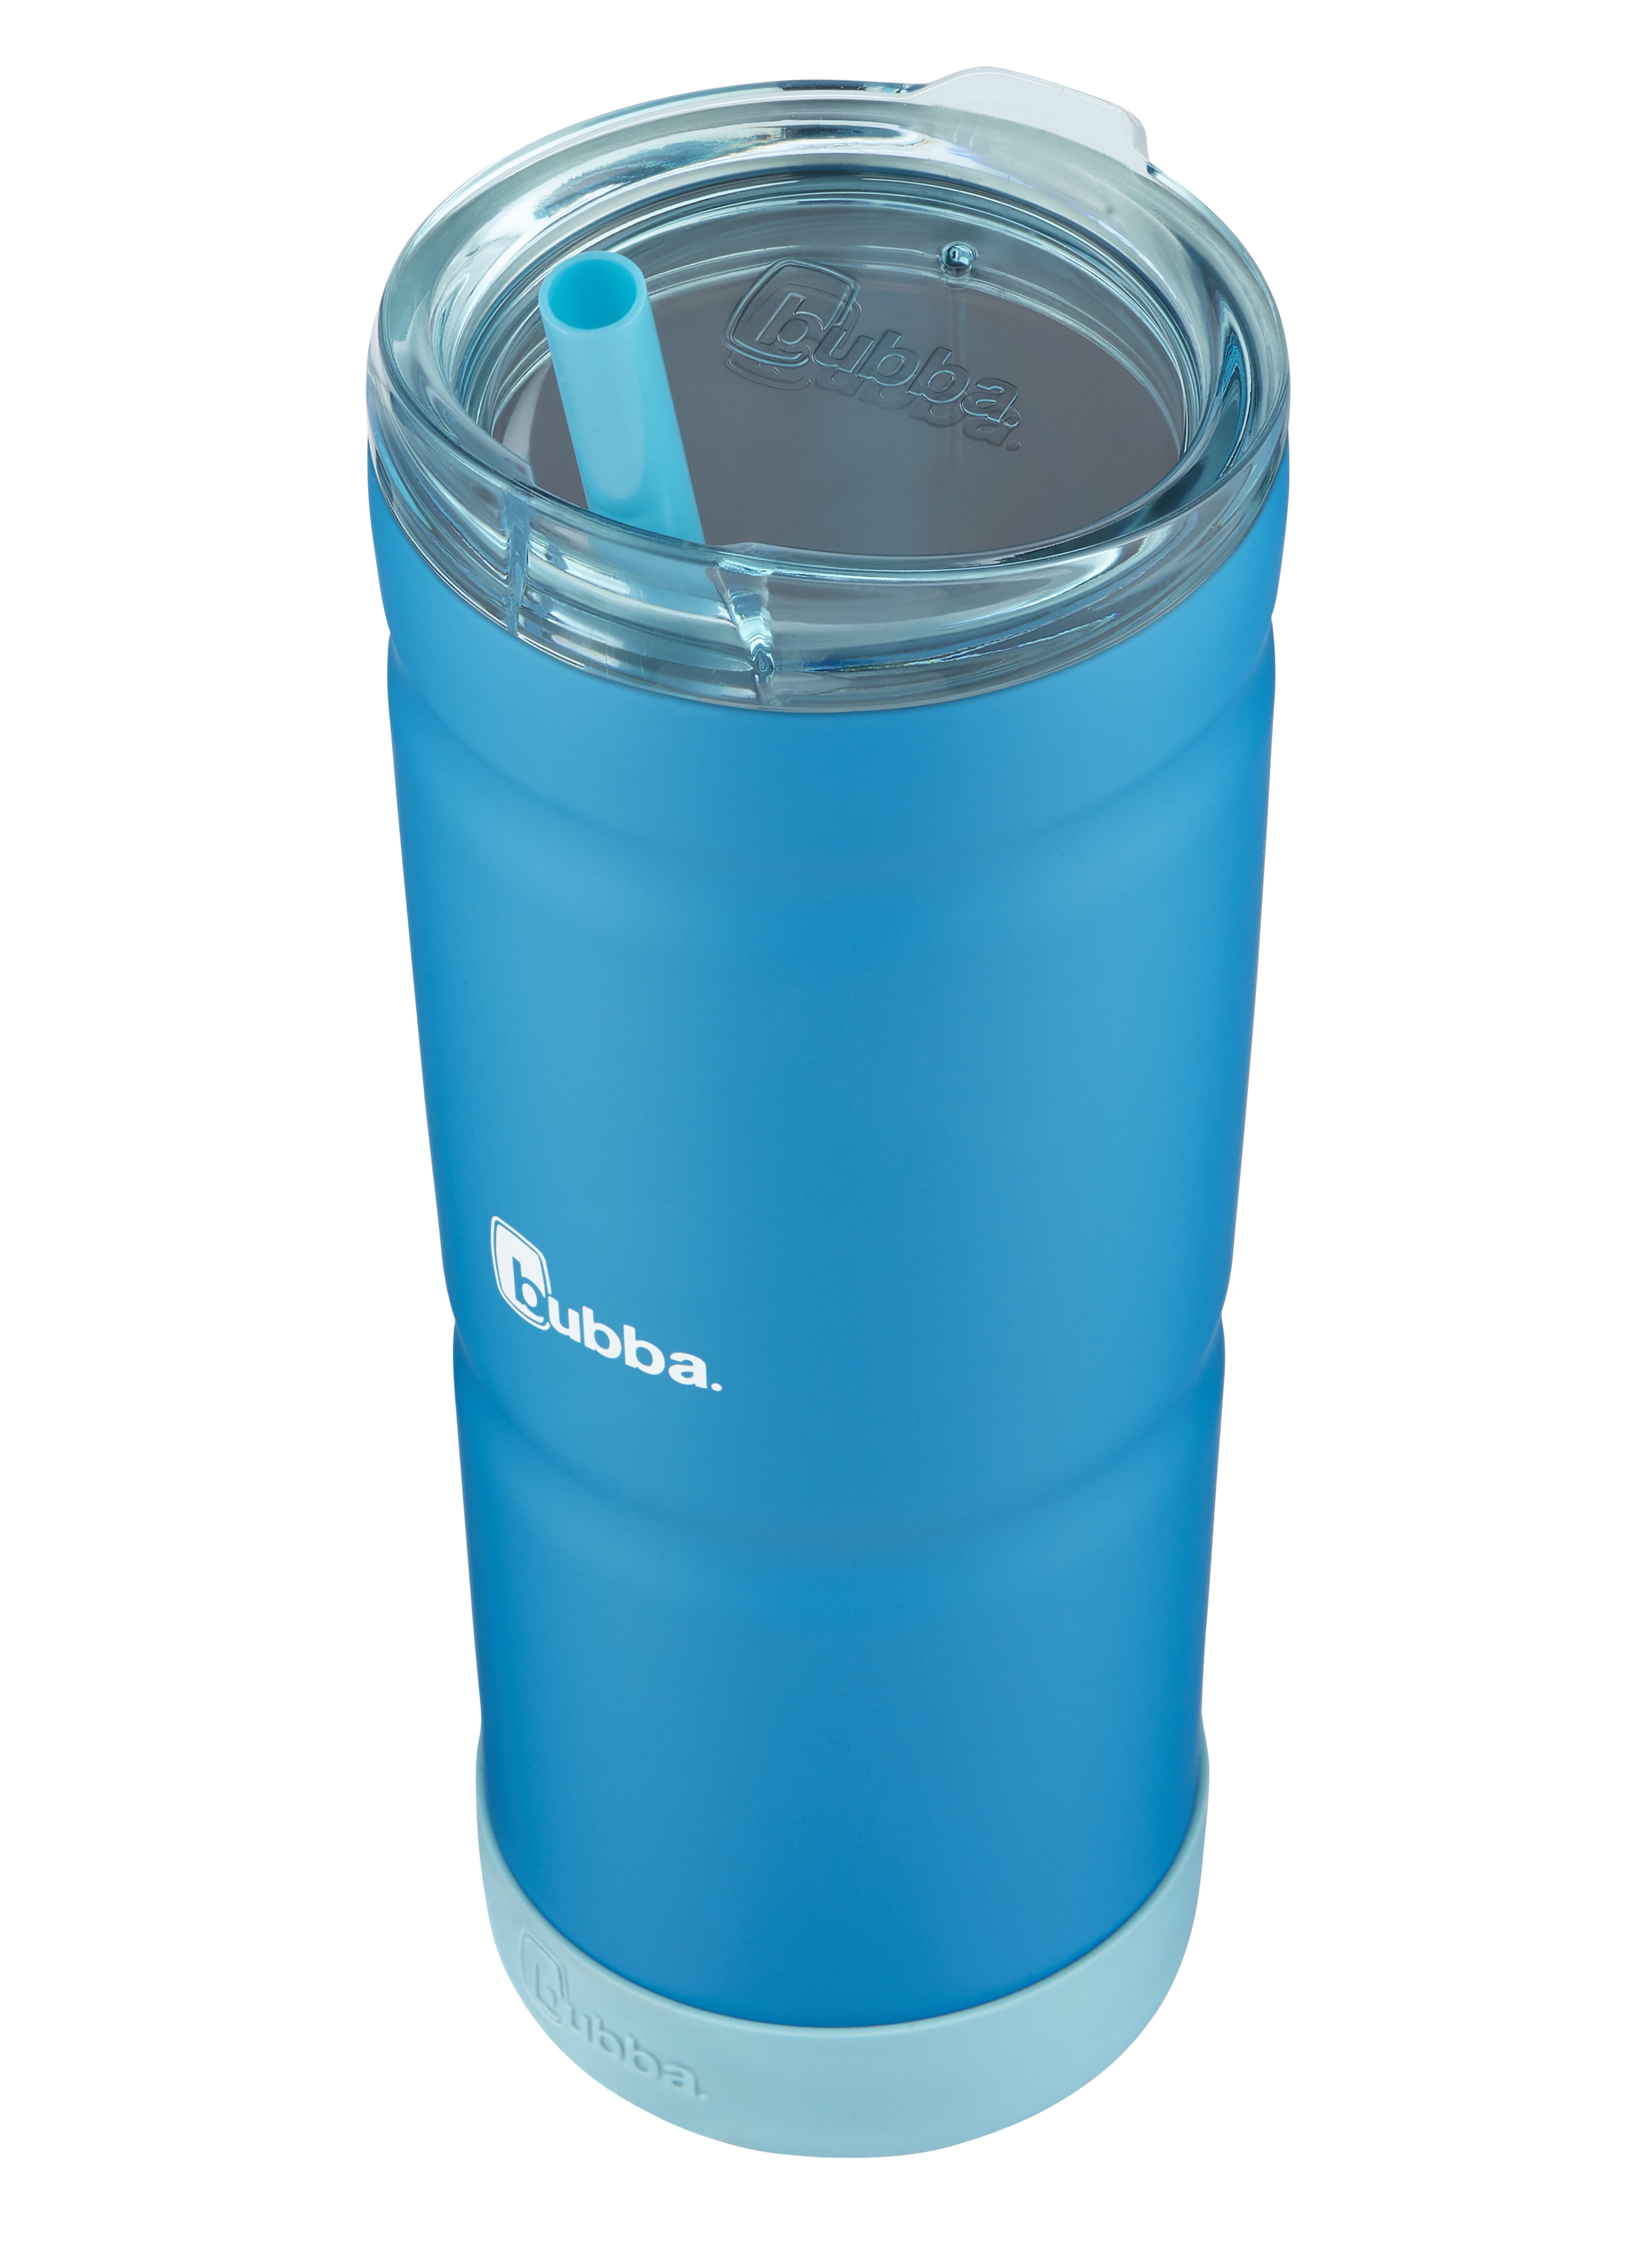 Bubba Envy S Stainless Steel Tumbler w/ Straw, 24 oz - Island Teal